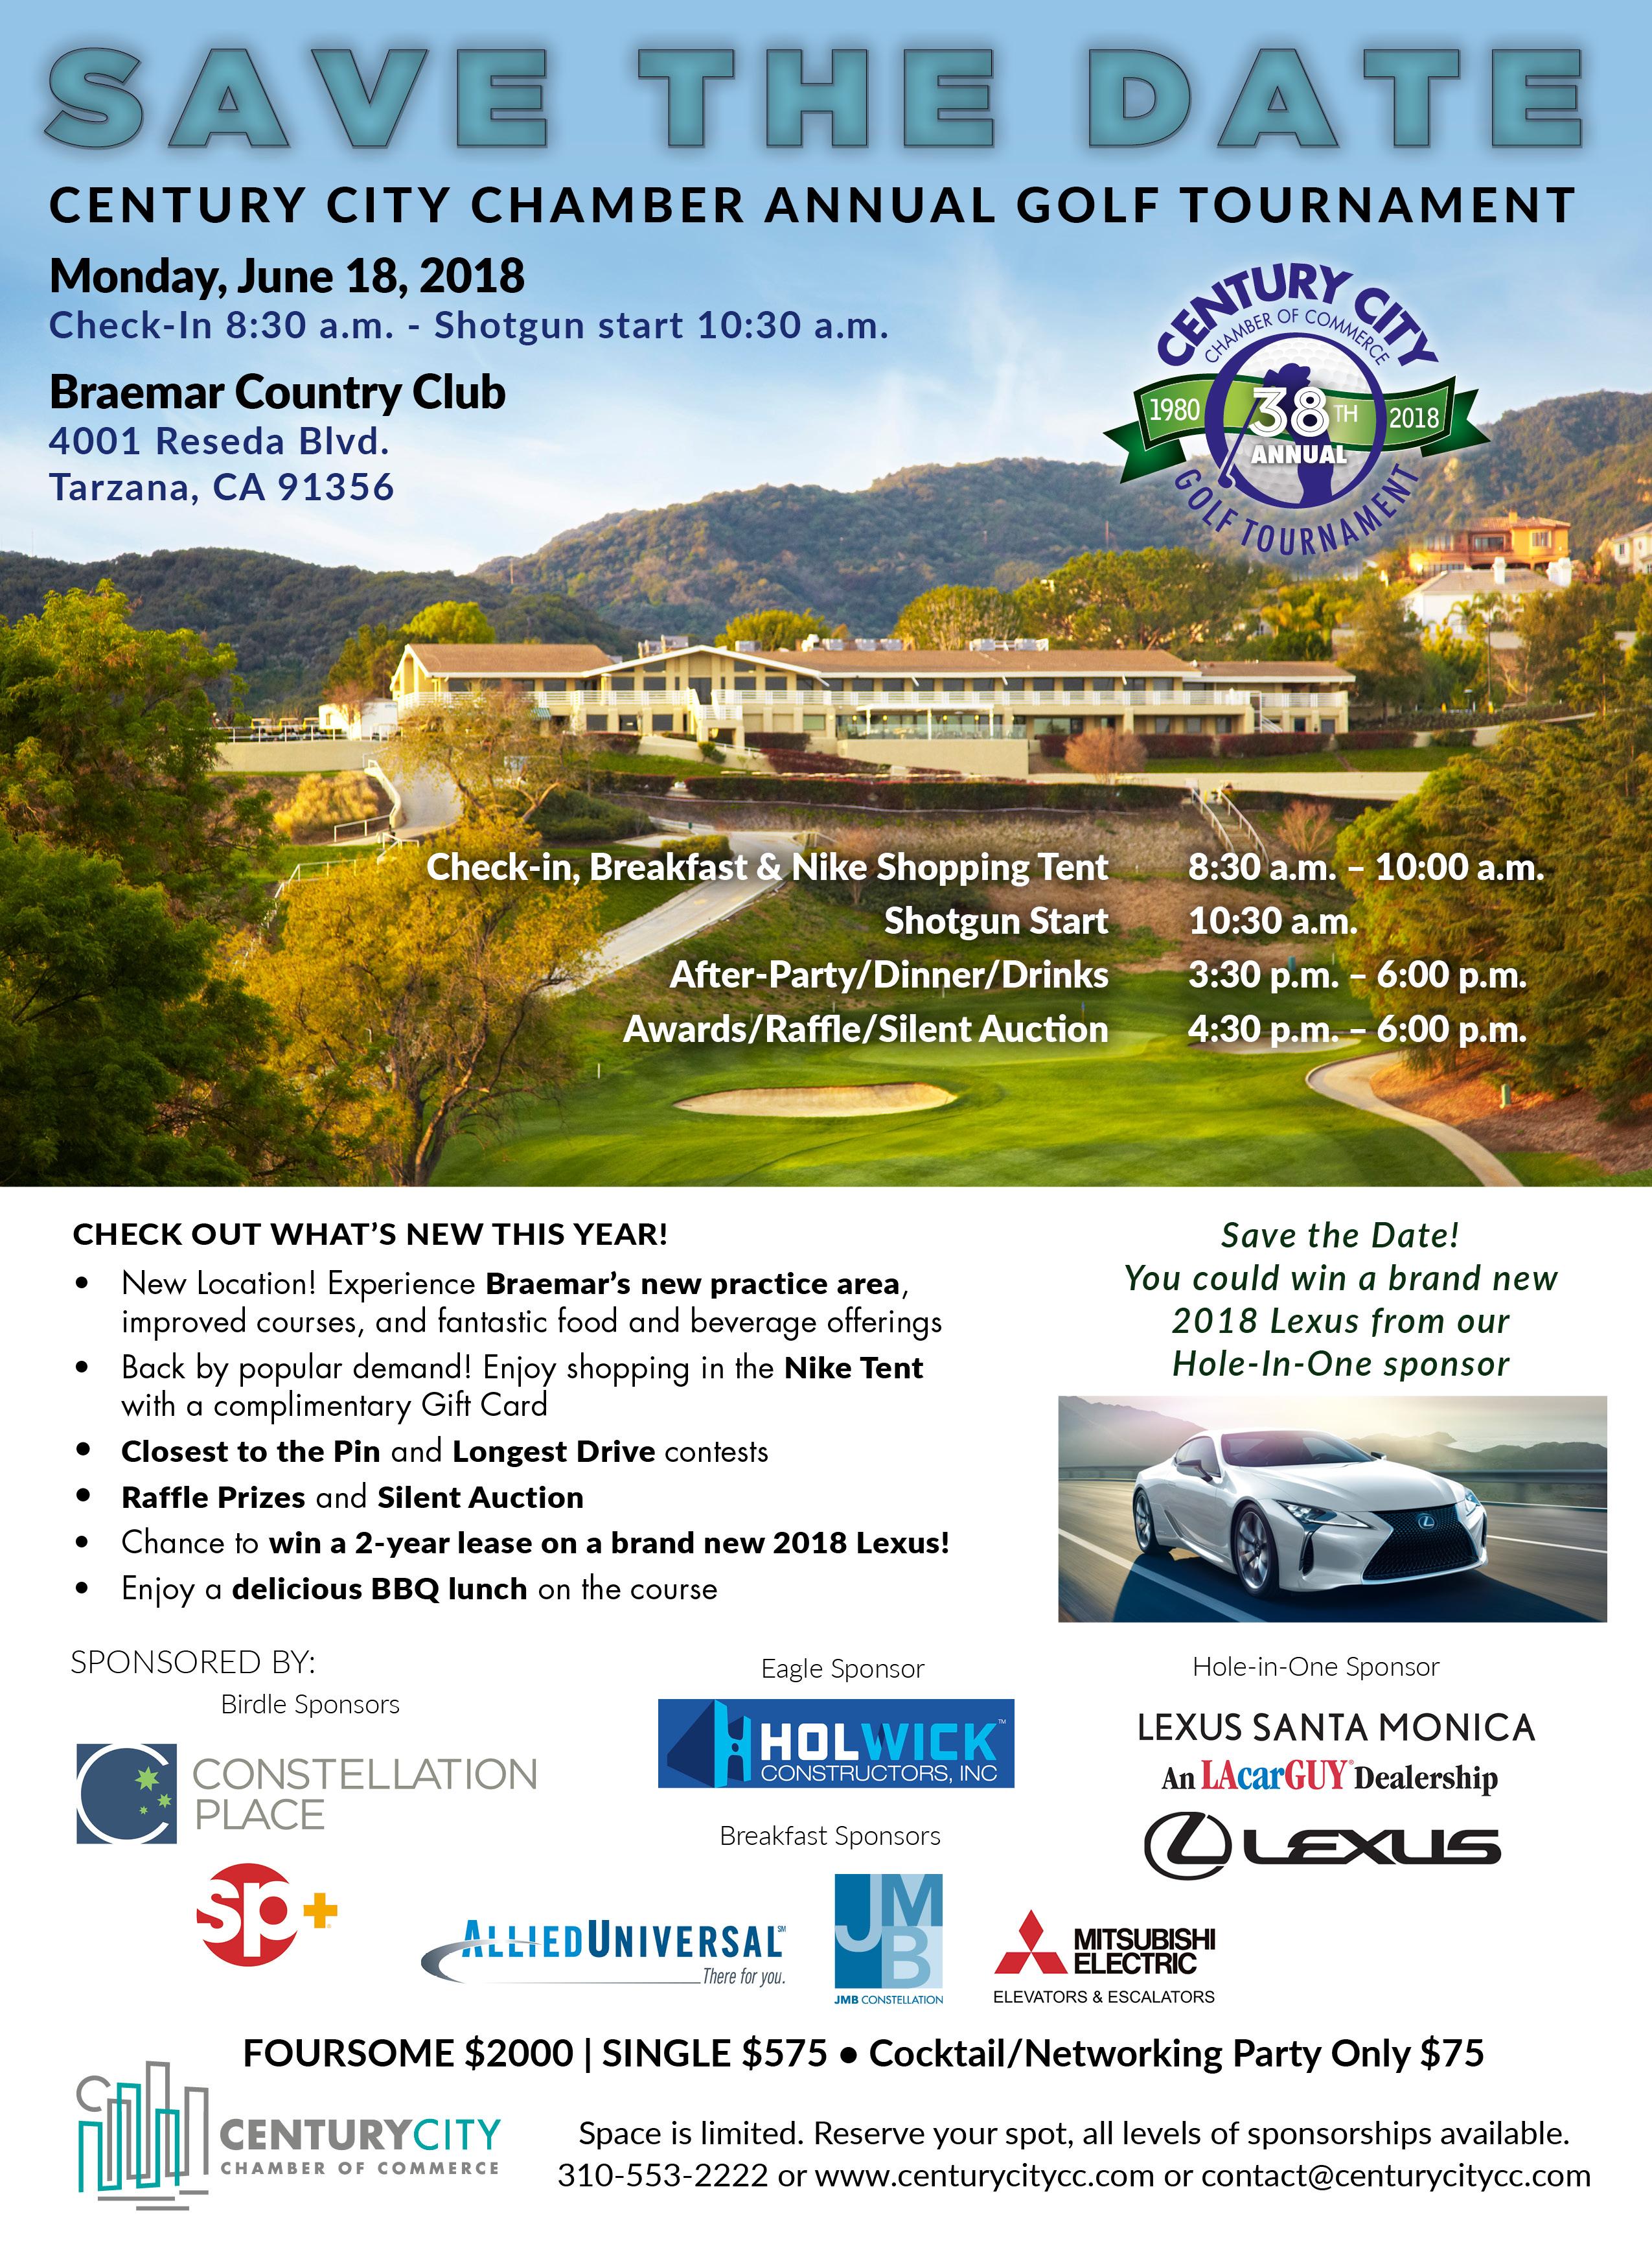 Century City Chamber of Commerce 38th Annual Golf Tournament